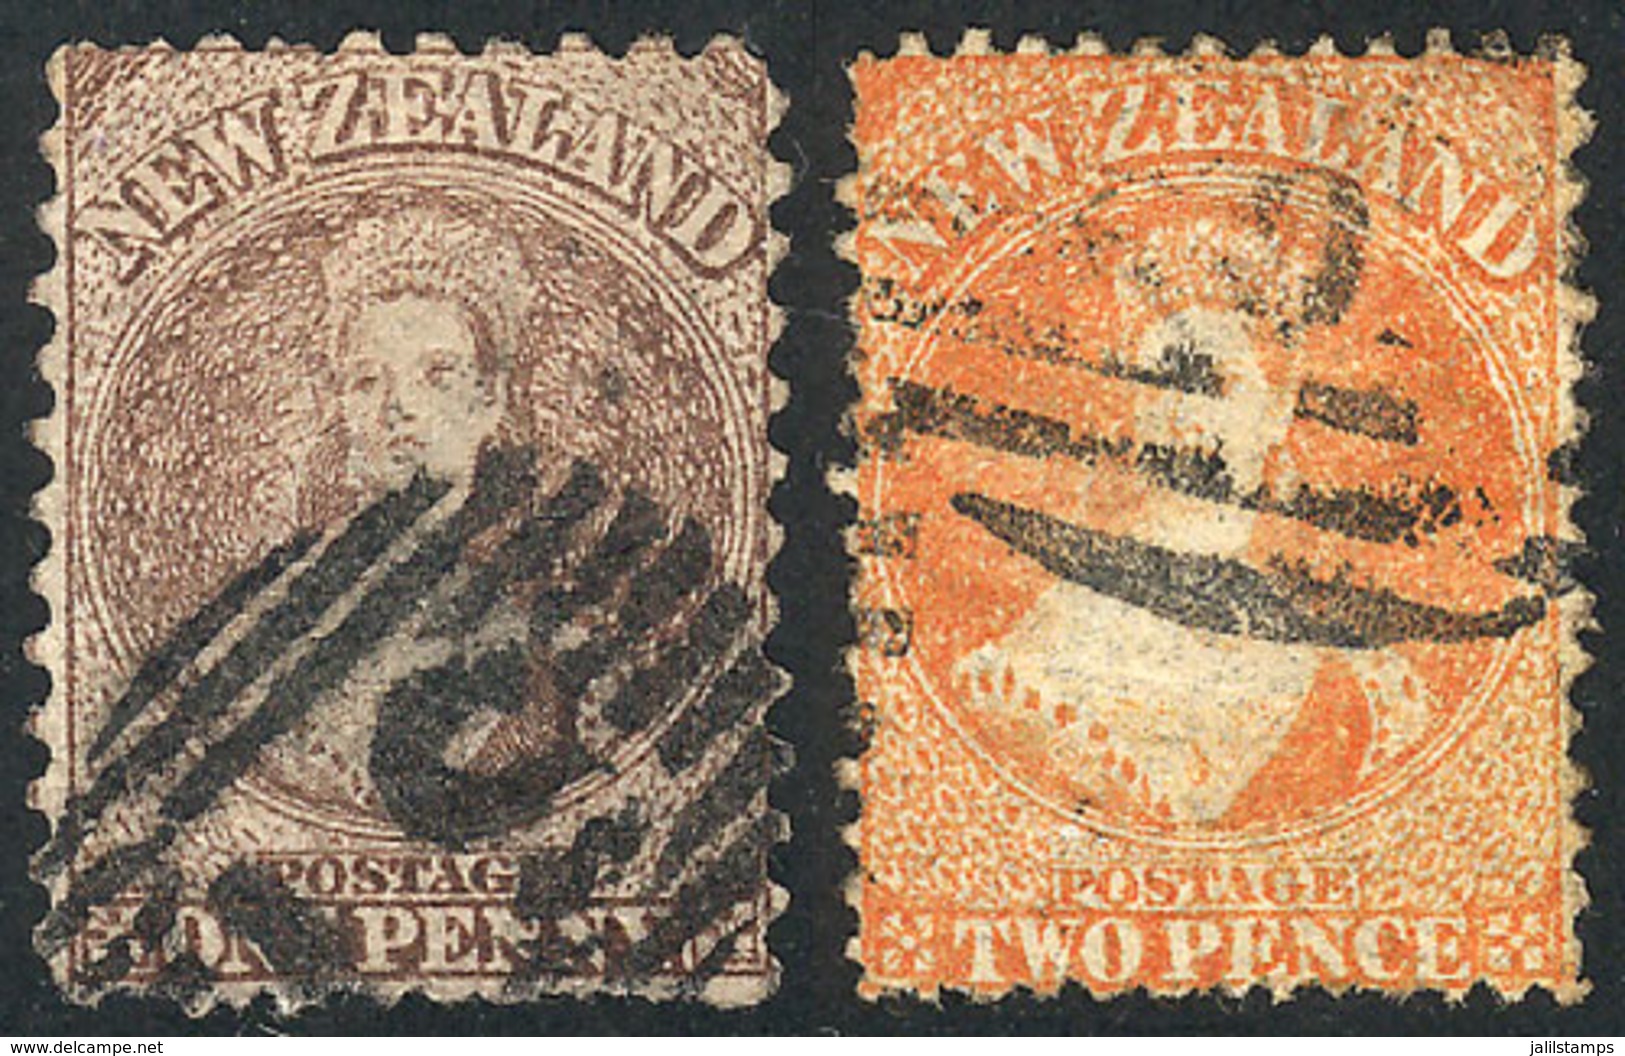 NEW ZEALAND: Sc.38 + 40, 1871 1p. Brown Perf 10 And 2p. Orange Perf 12½, Used, Fine To VF Quality, Catalog Value US$172. - Gebraucht